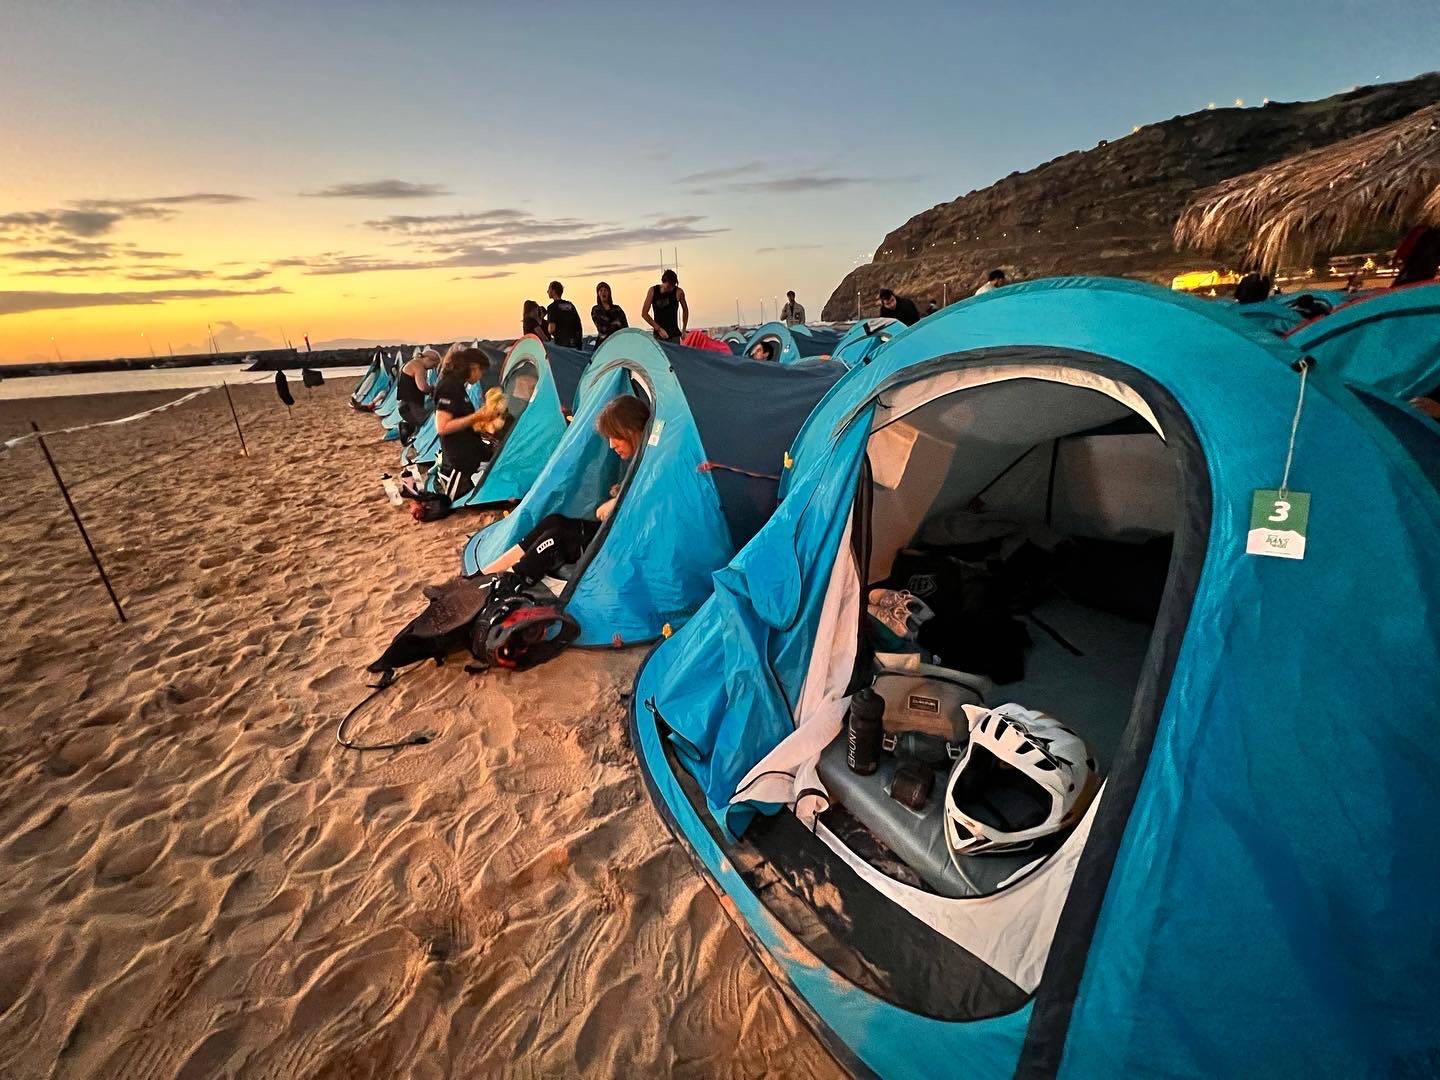 Tents and campers on the beach